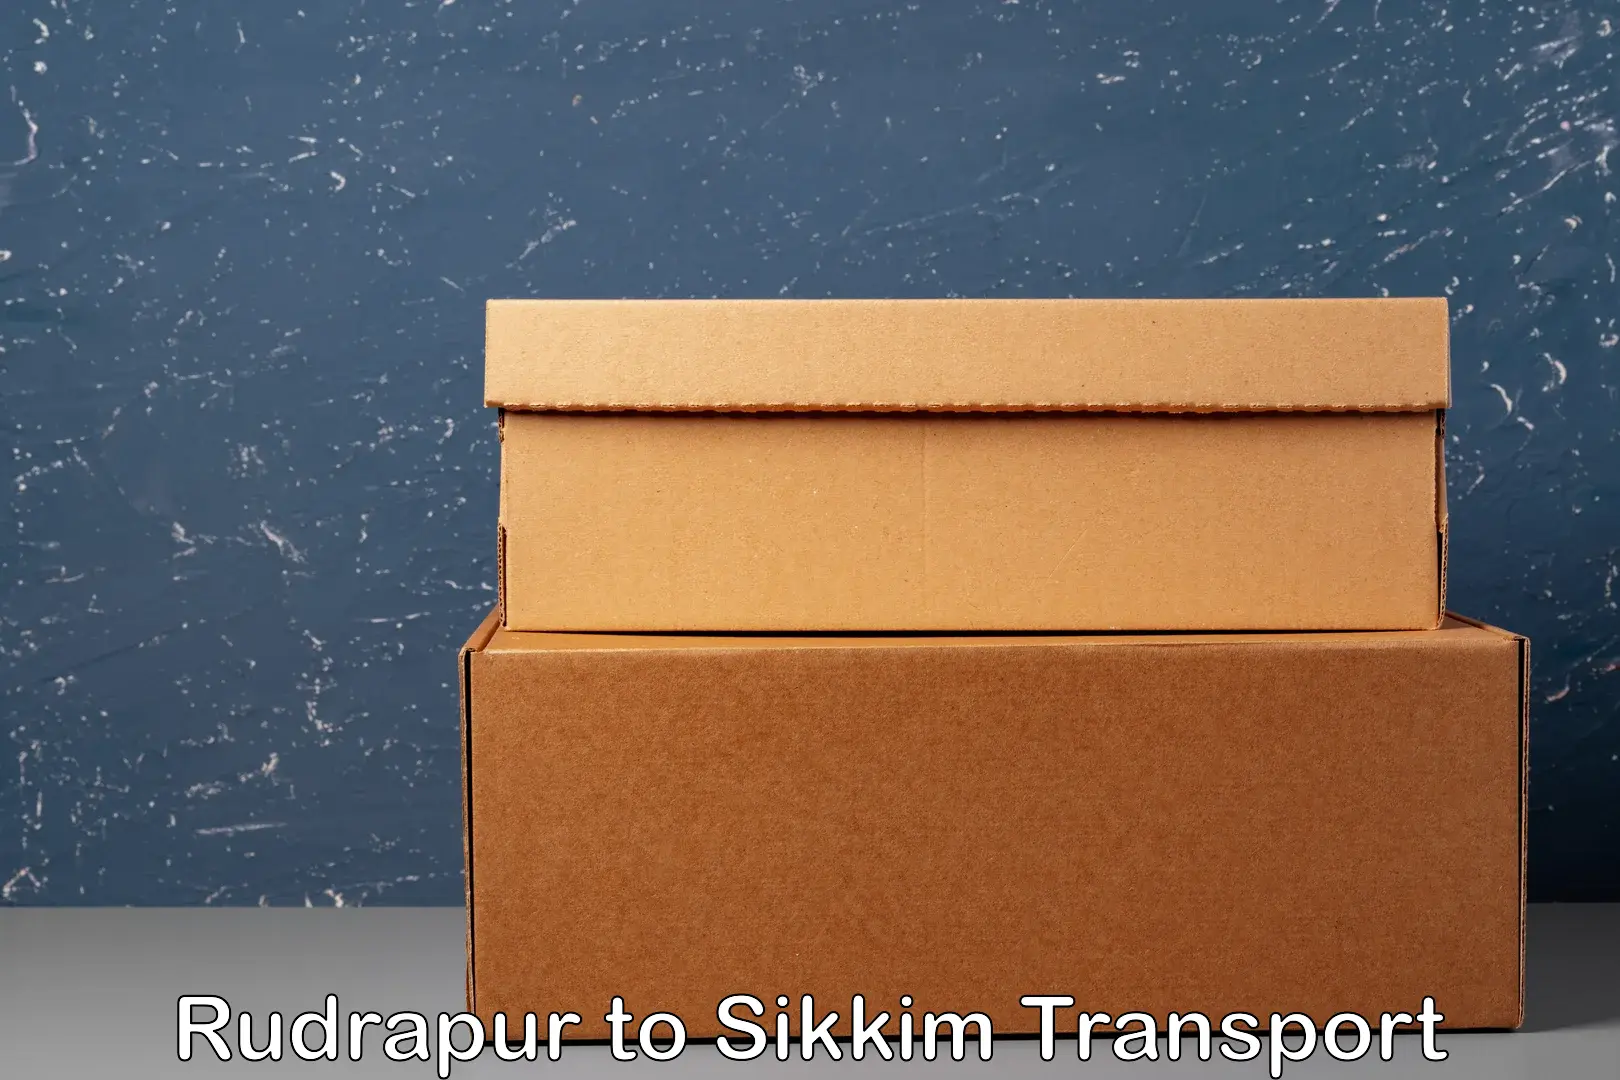 Container transport service Rudrapur to Sikkim